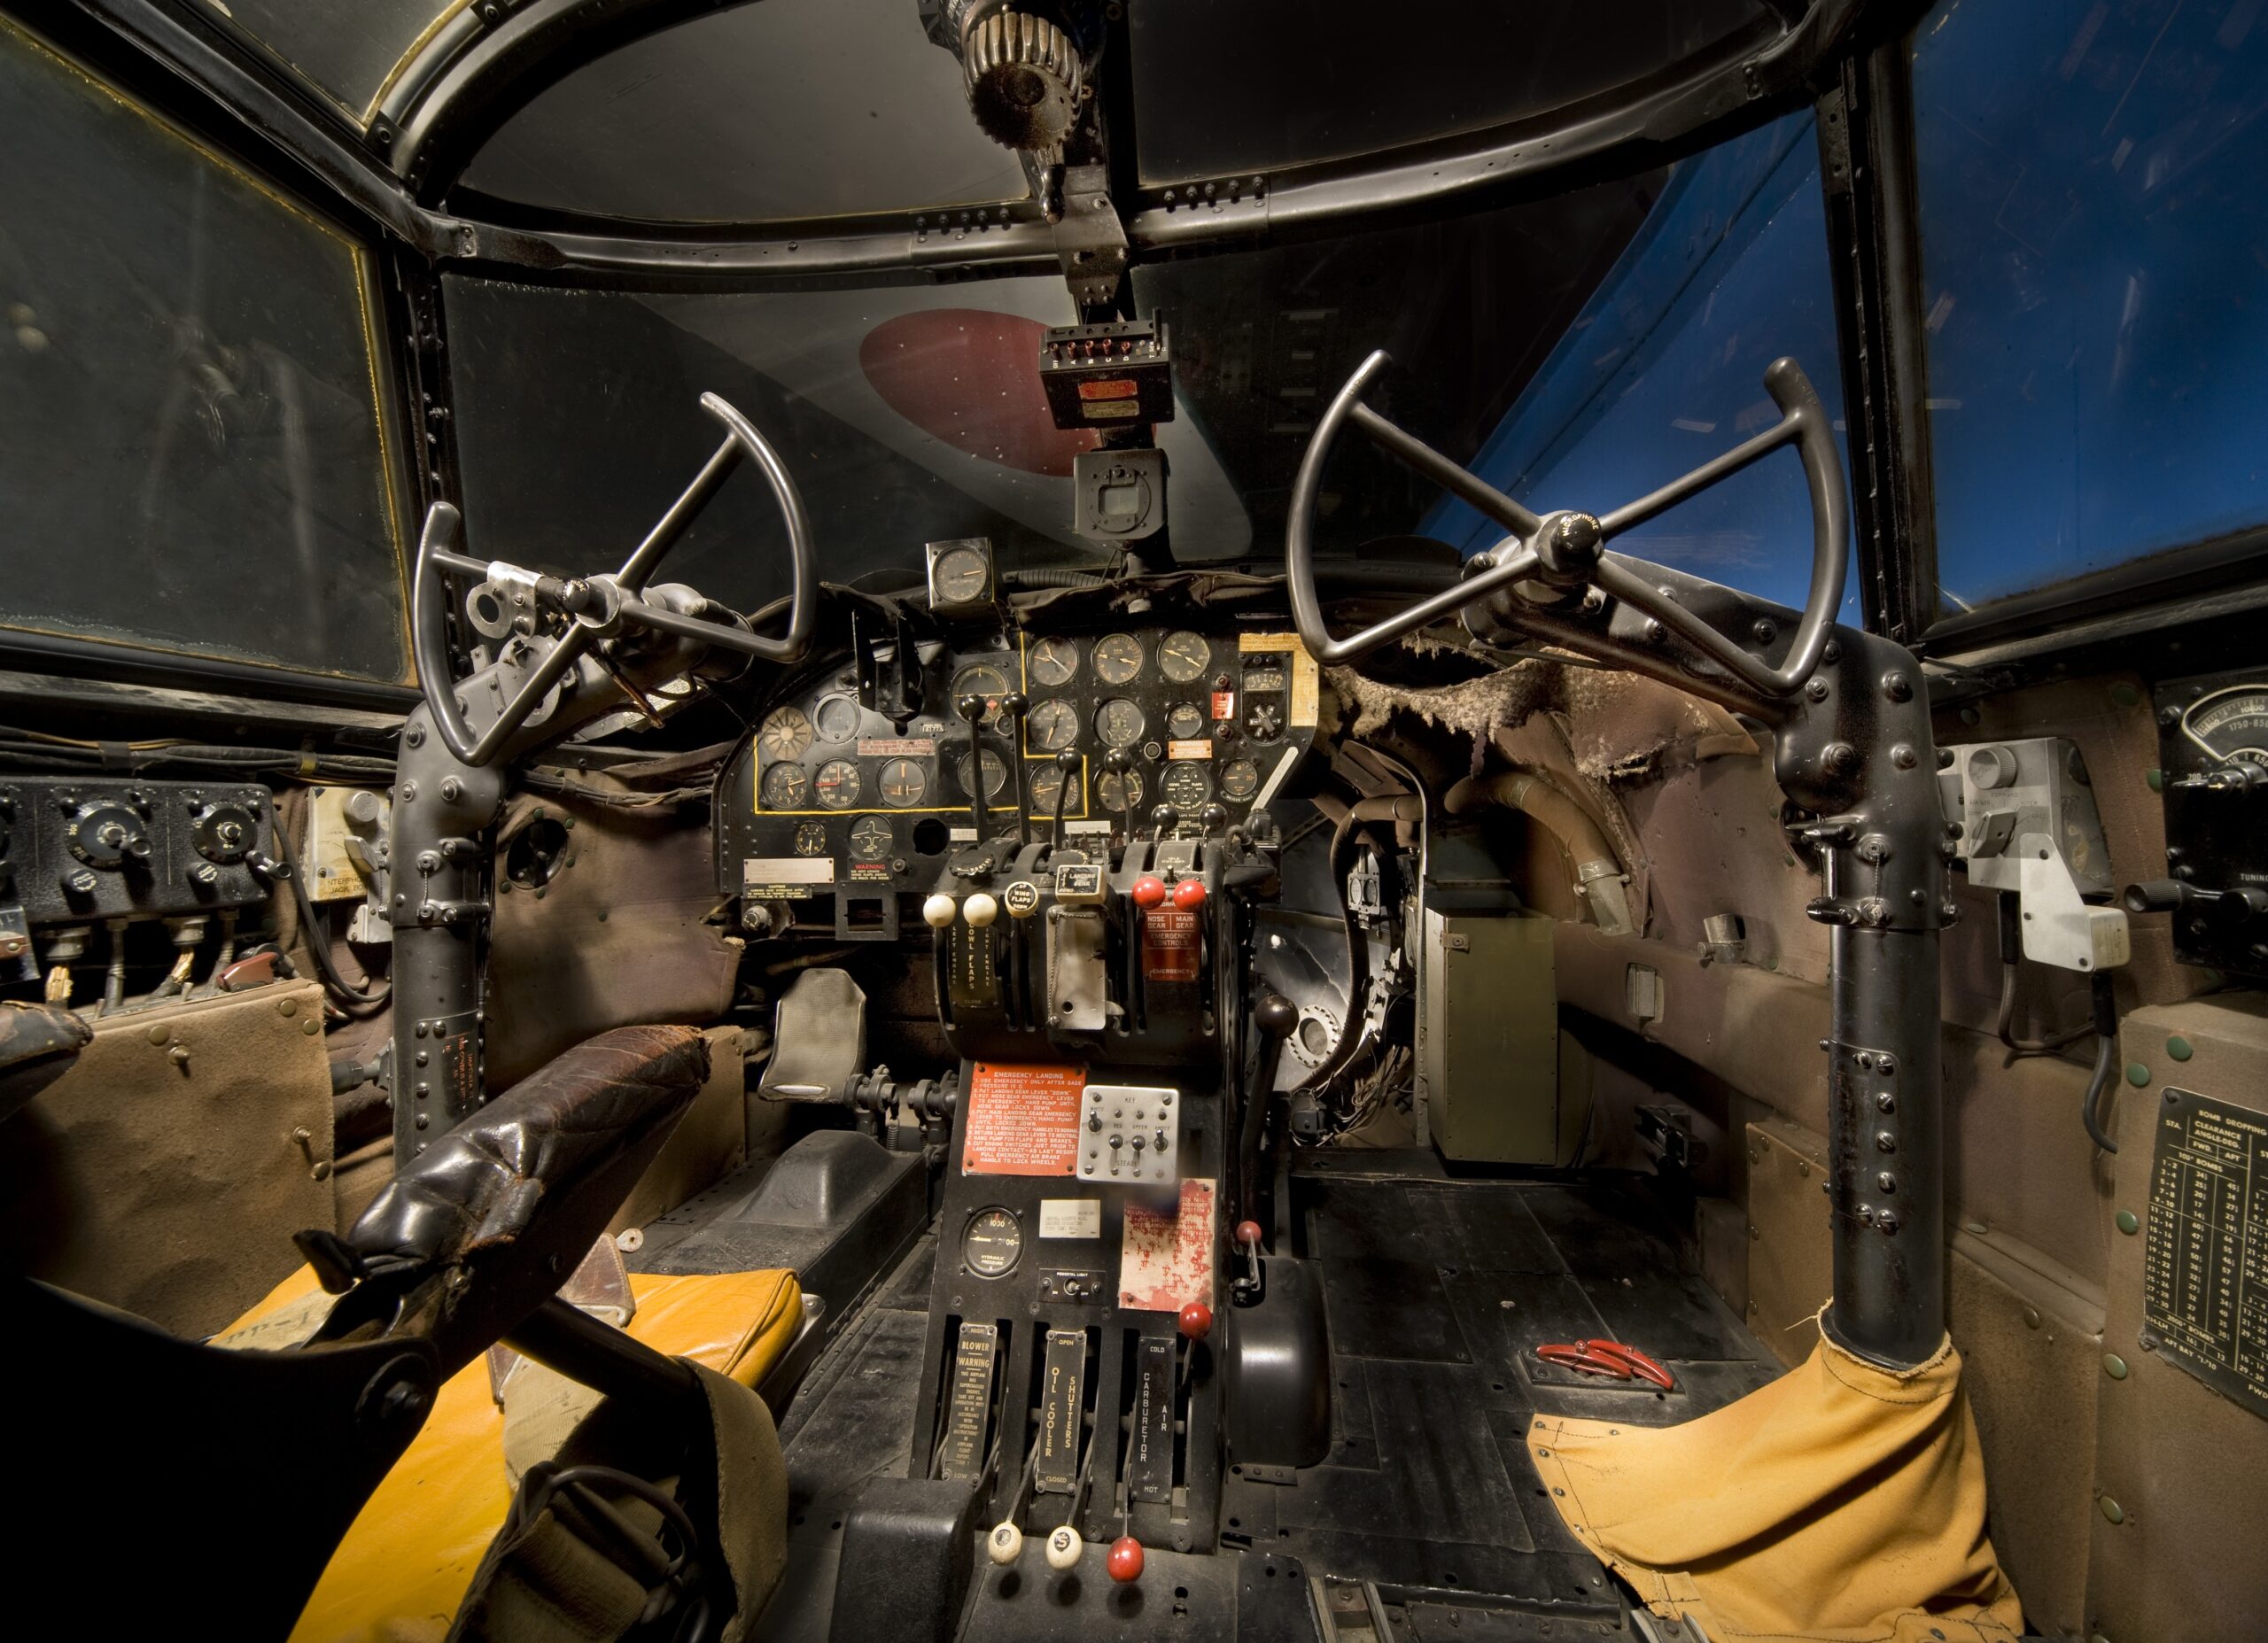 View of the cockpit, showing interior of the Martin B-26B Marauder "Flak-Bait" (A19600297000) as seen after display in the World War II Aviation exhibit (Gallery 205) of the National Air and Space Museum, Washington, DC, April 10, 2014. [FlakBait]